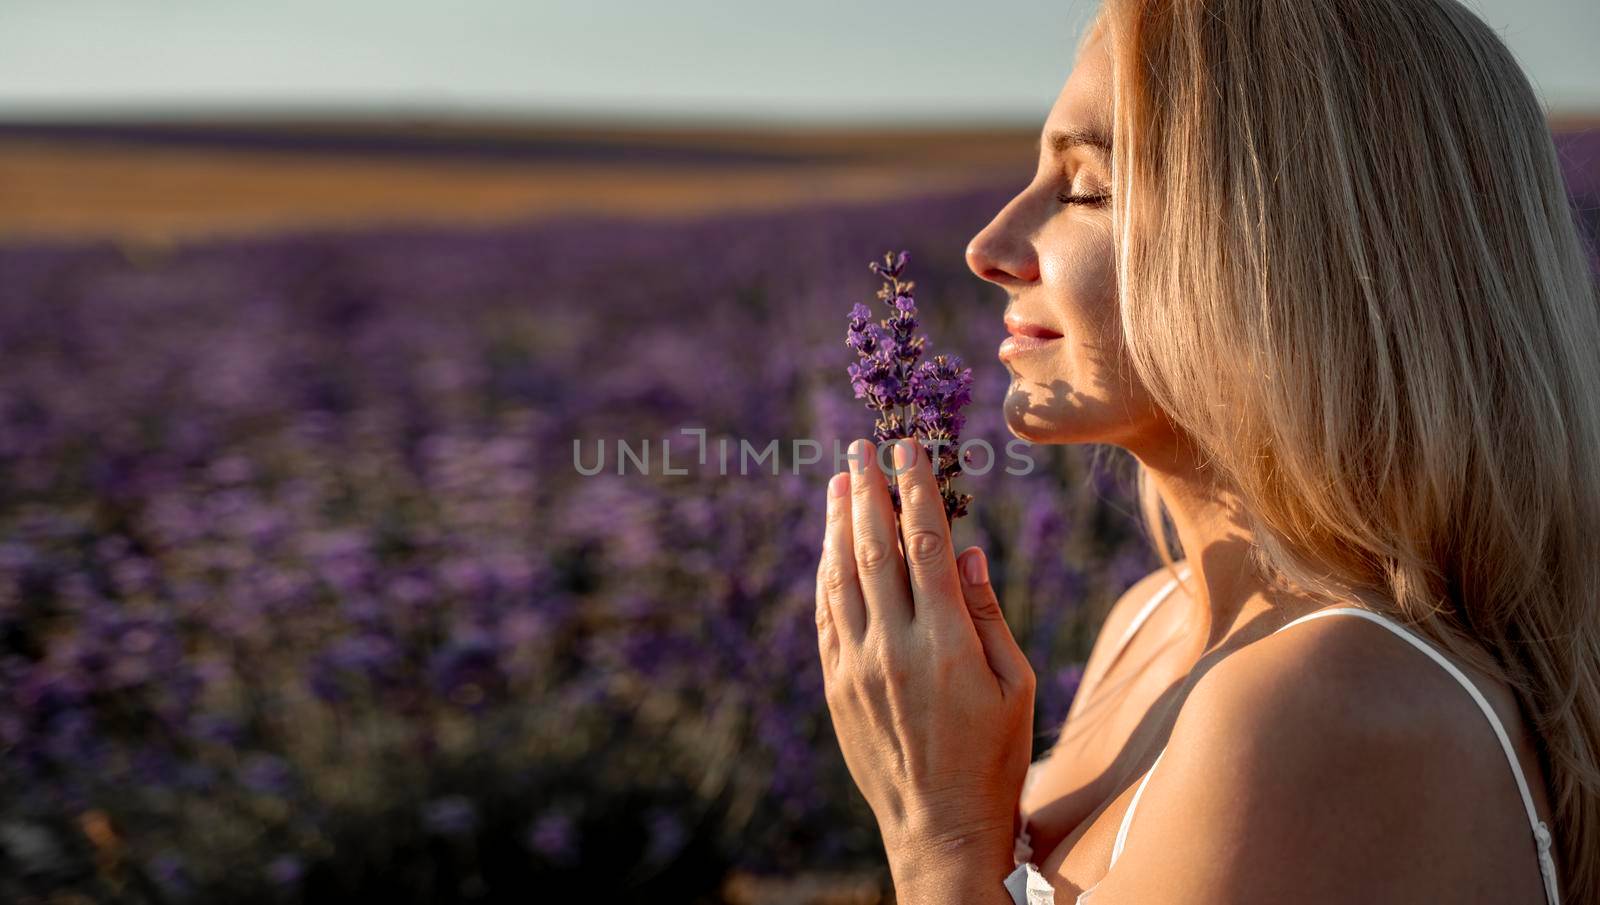 Beautiful blonde is in the field of lavender, holds a bouquet of flowers and enjoys aromatherapy. The girl's eyes are closed. The concept of aromatherapy, lavender oil, photo shoot in lavender.